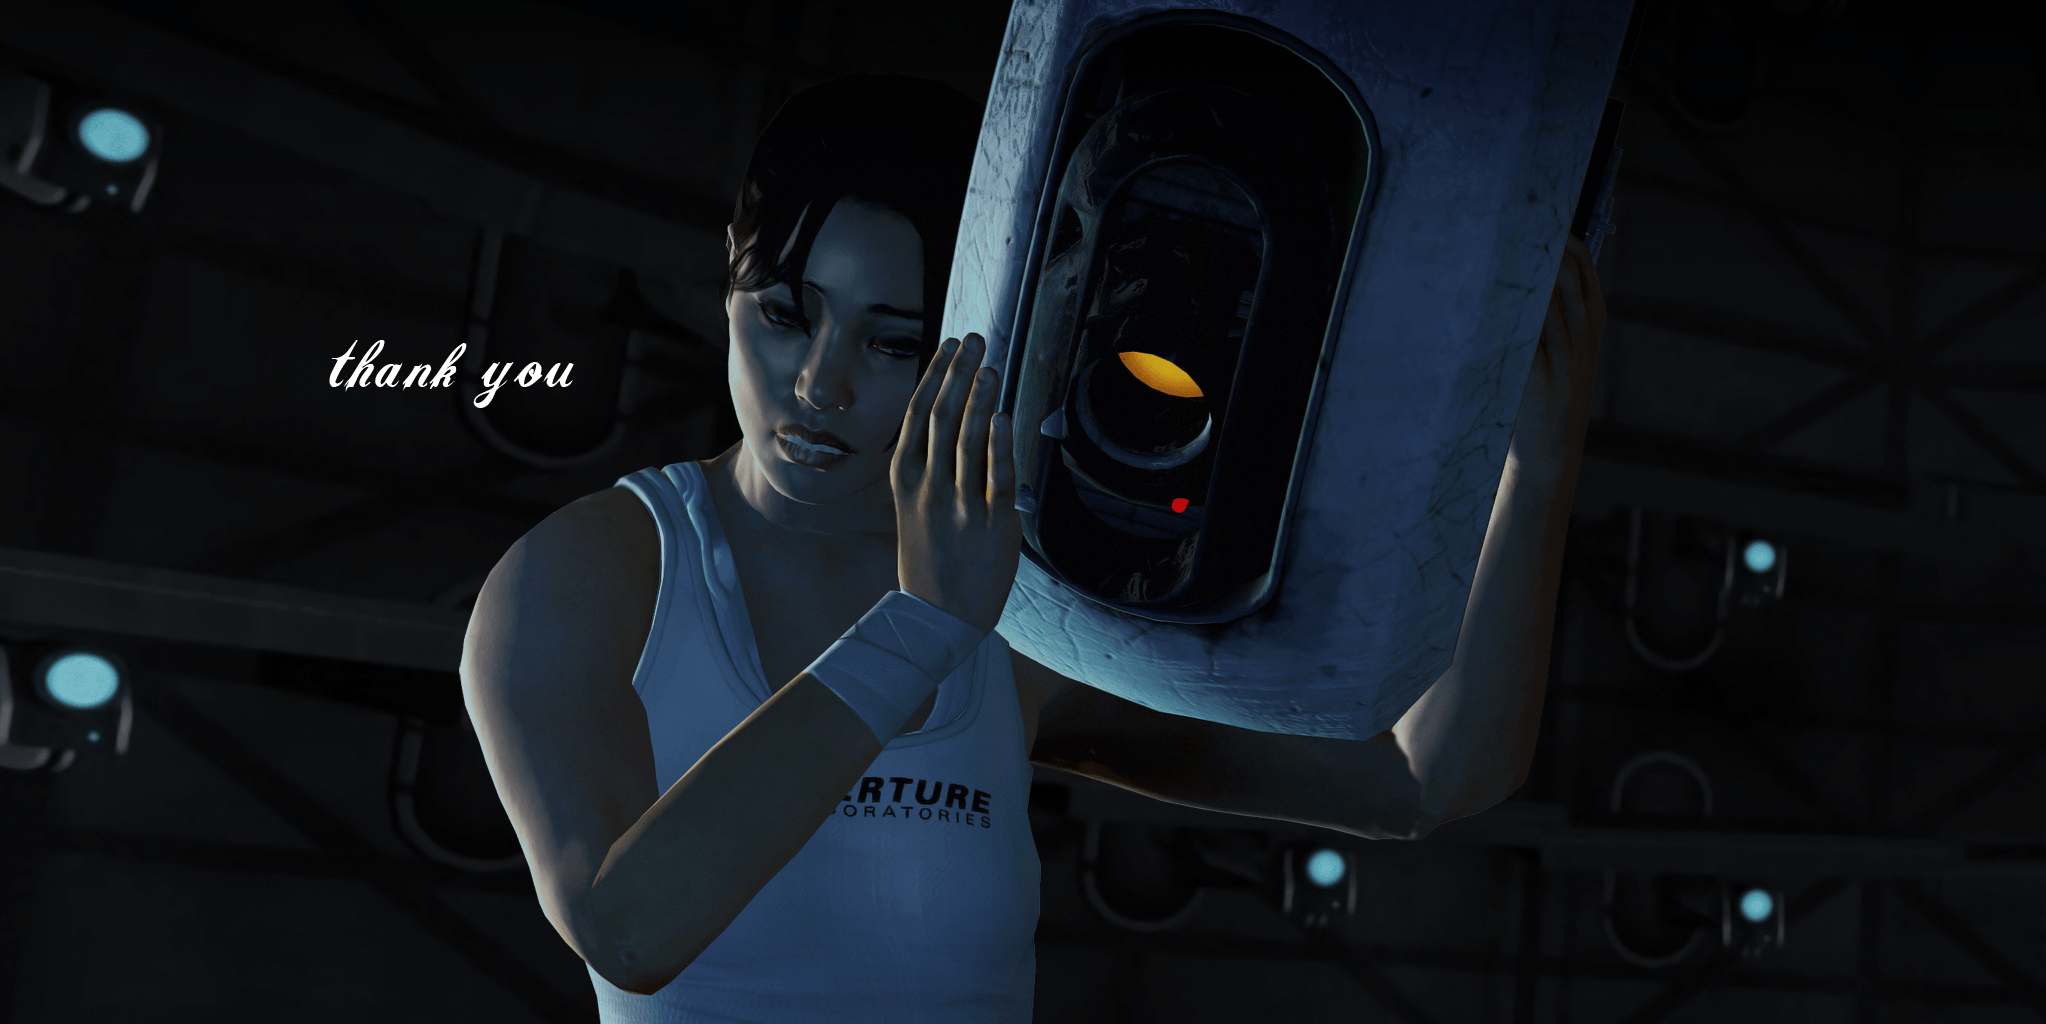 Glados Wallpapers, Gallery of 36 Glados Backgrounds, Wallpapers